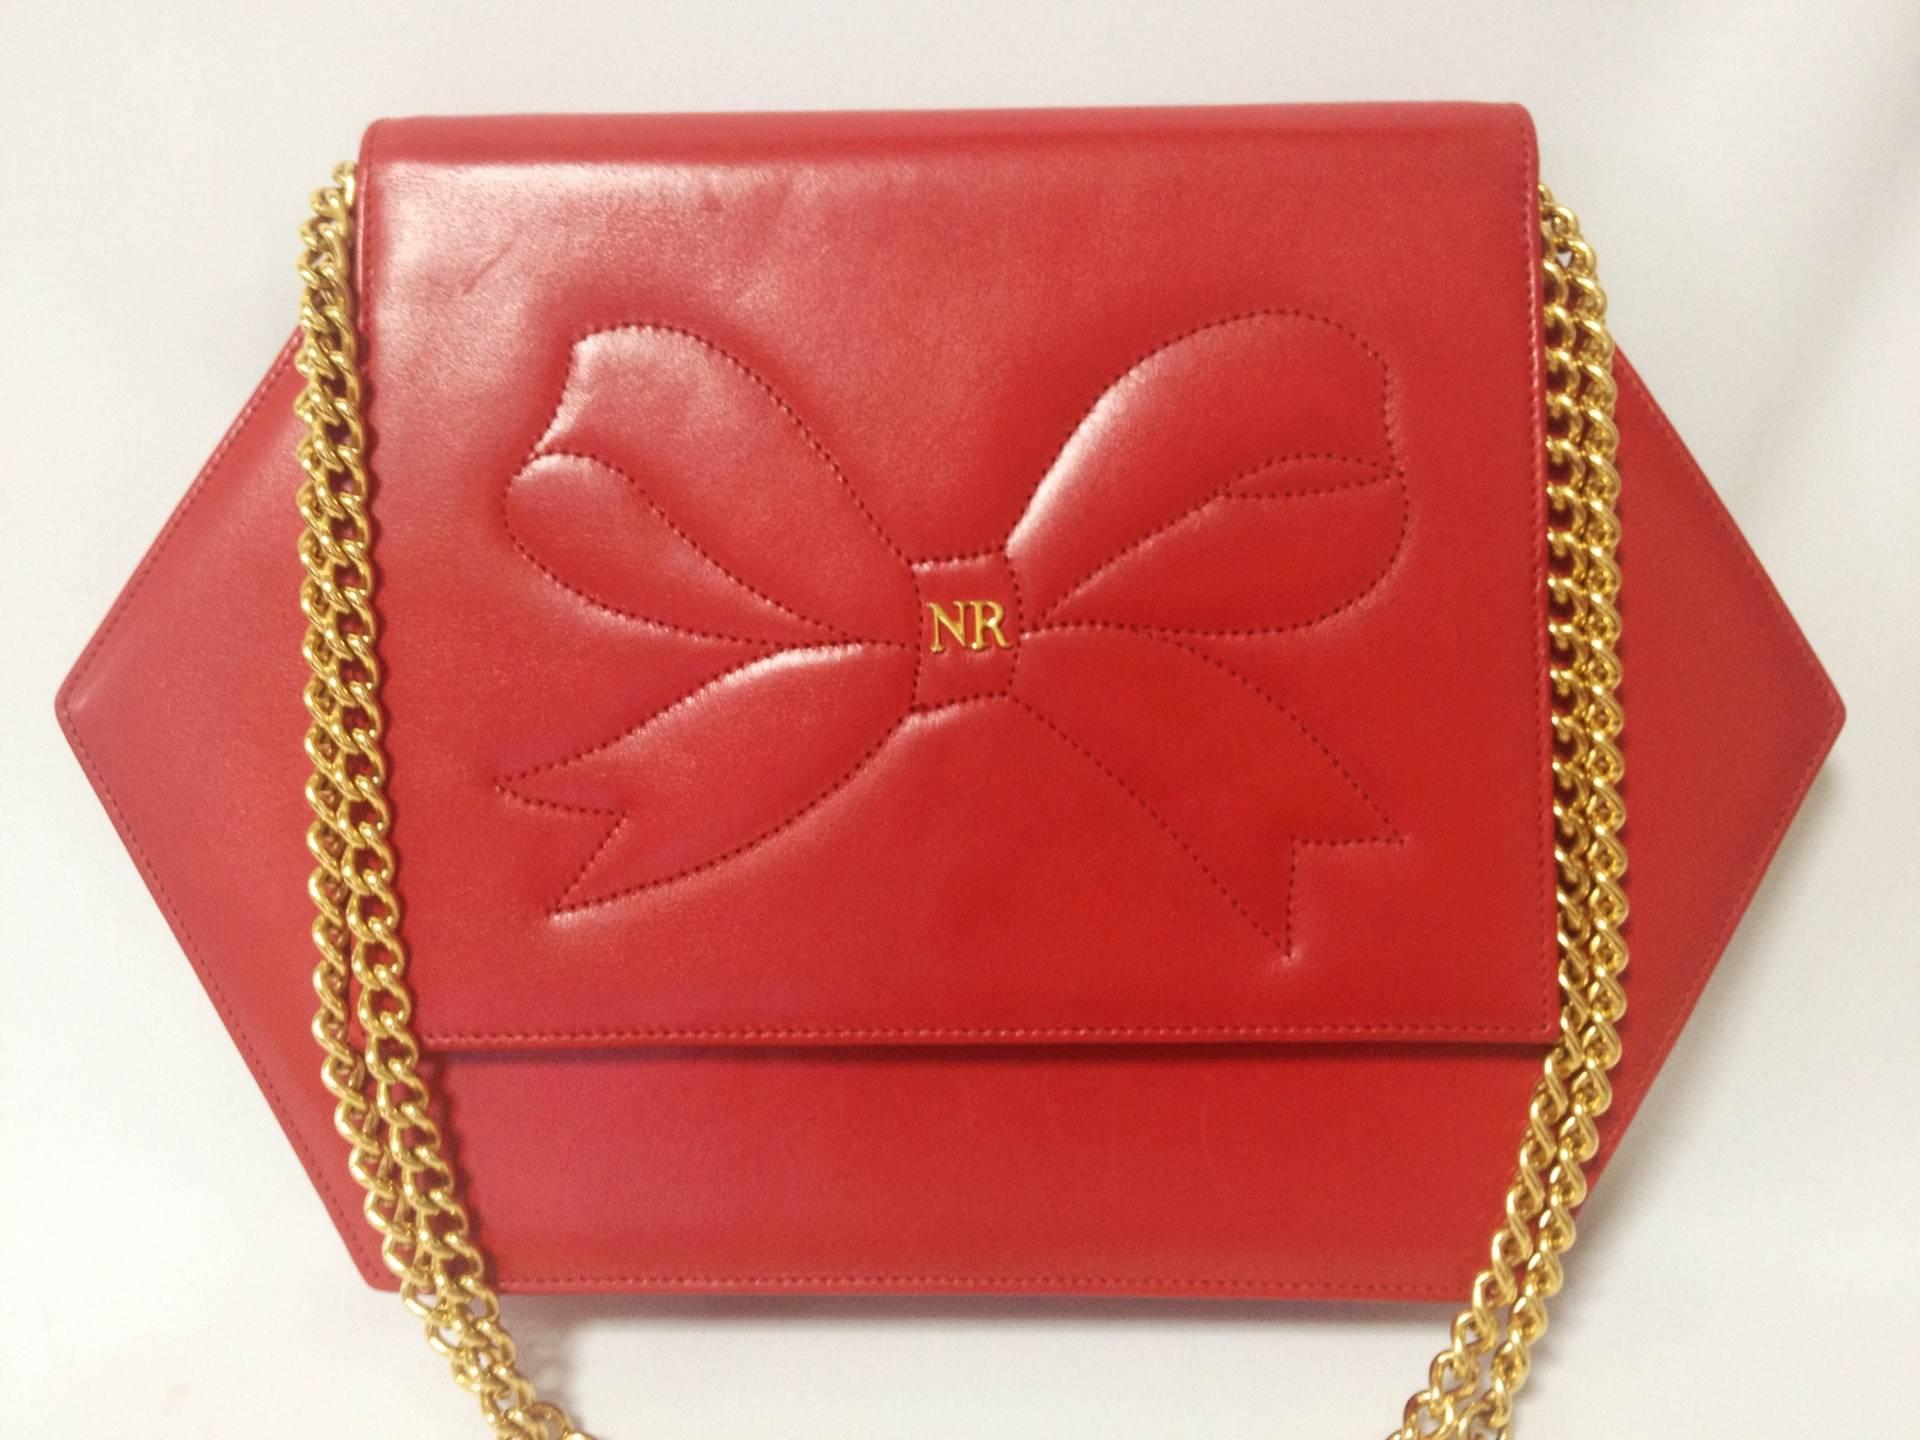 Vintage Nina Ricci red leather hexagon shape clutch shoulder bag with a large bow stitch and golden chain. Perfect party purse. Rare purse.

Introducing another cutest and rare vintage purse from Nina Ricci. A red leather chain shoulder clutch